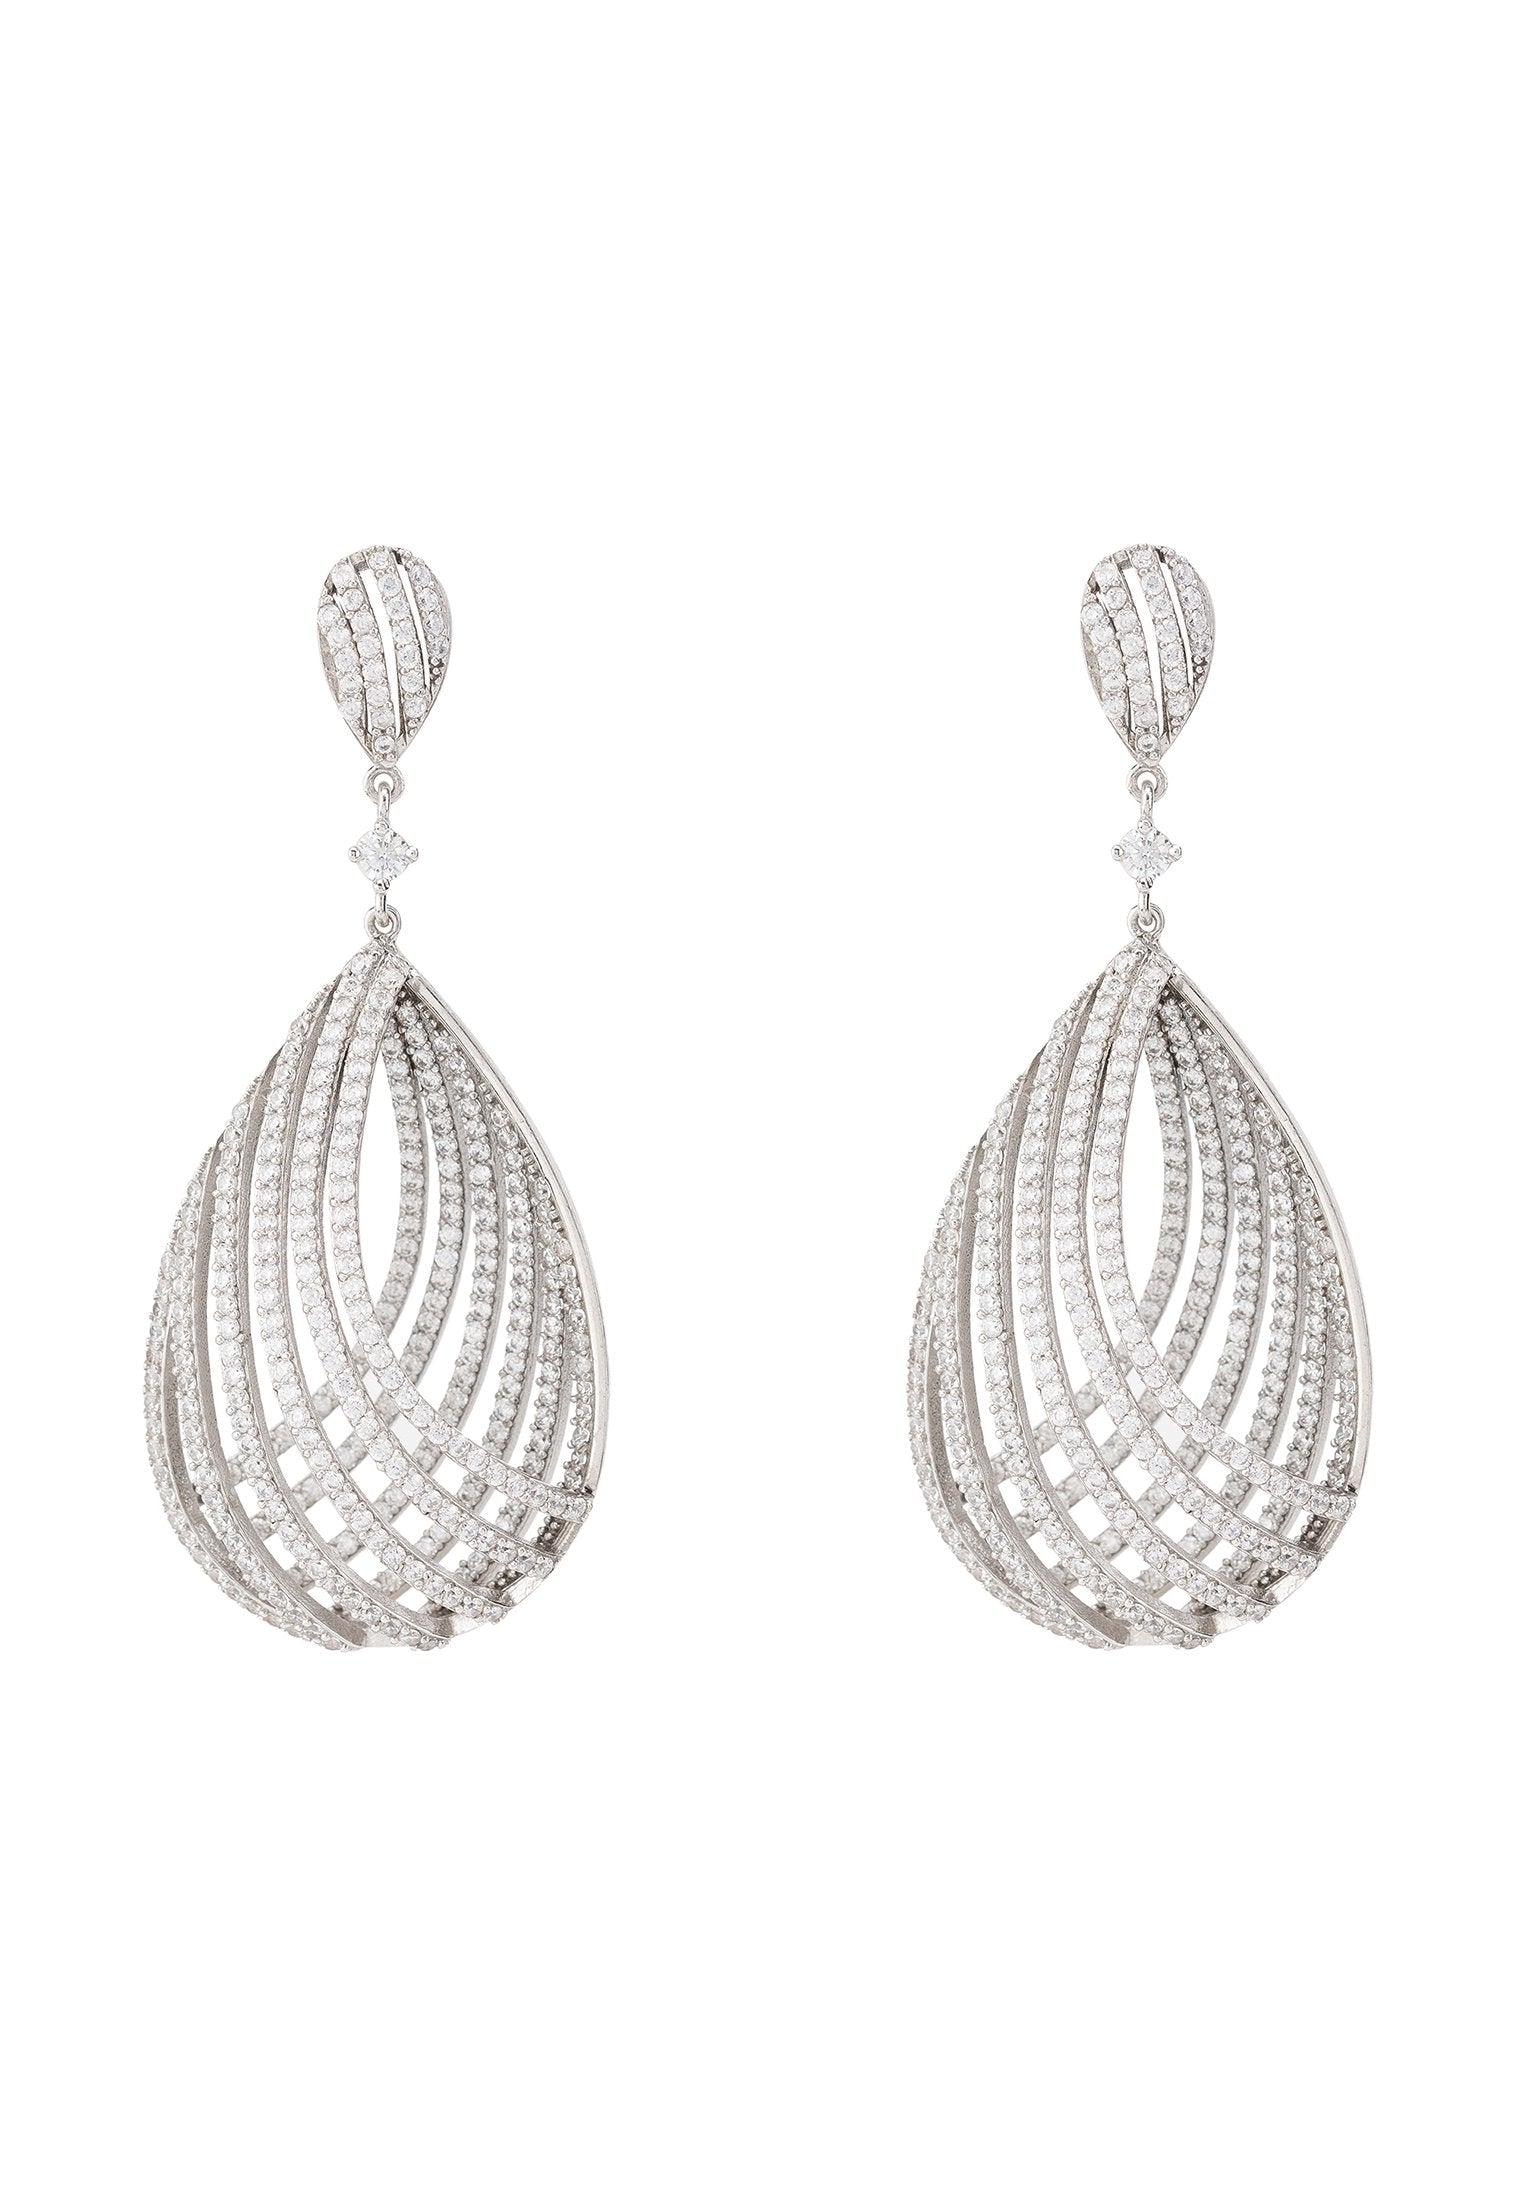 Hypnotic Vortex Teardrop Earrings in Sterling Silver with Zircon Detailing - Perfect for Weddings and Special Occasions - Jewelry & Watches - Bijou Her -  -  - 